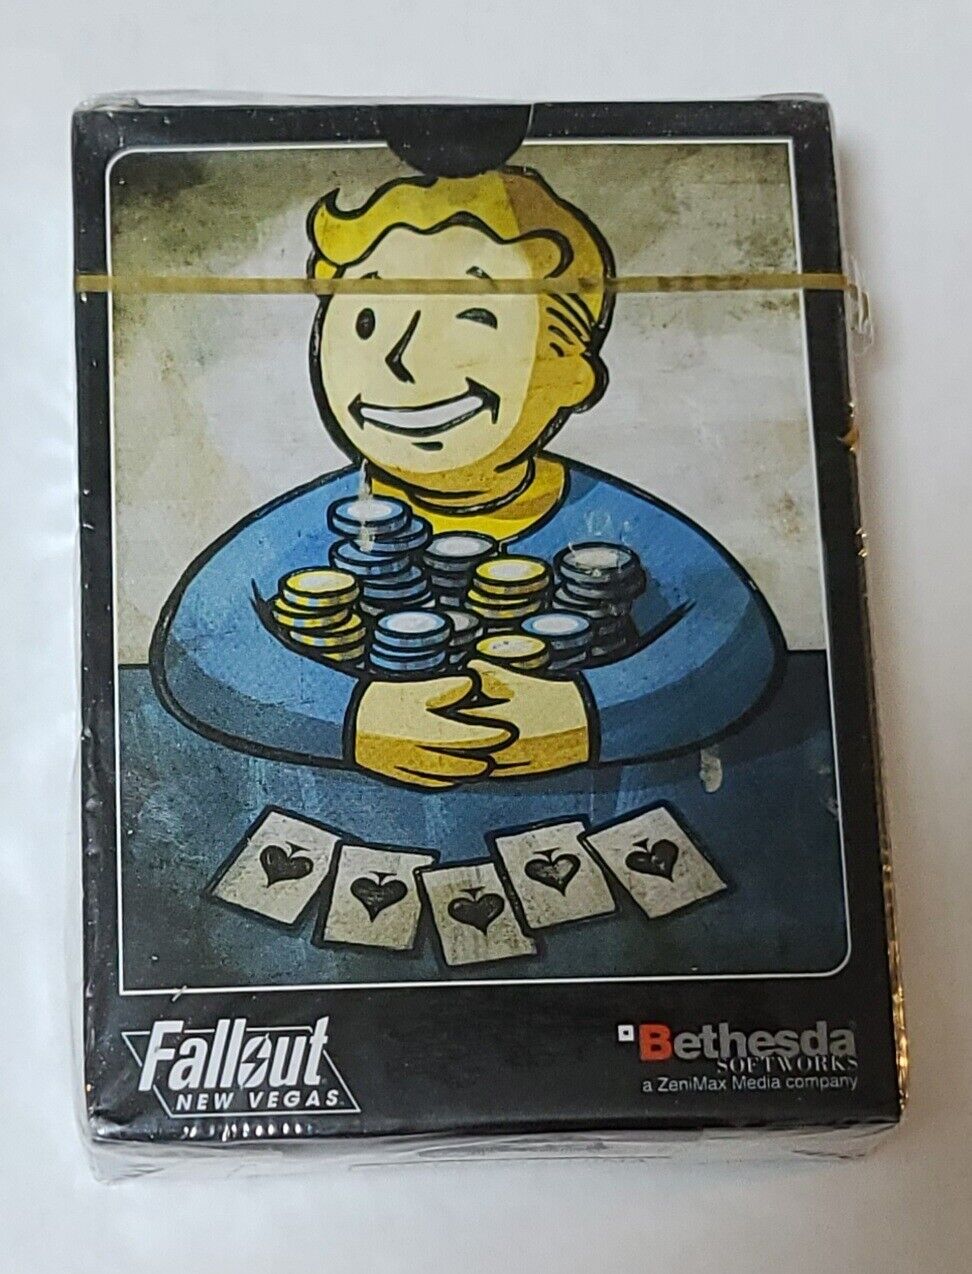 Fallout New Vegas Promotional Deck of Cards Sealed